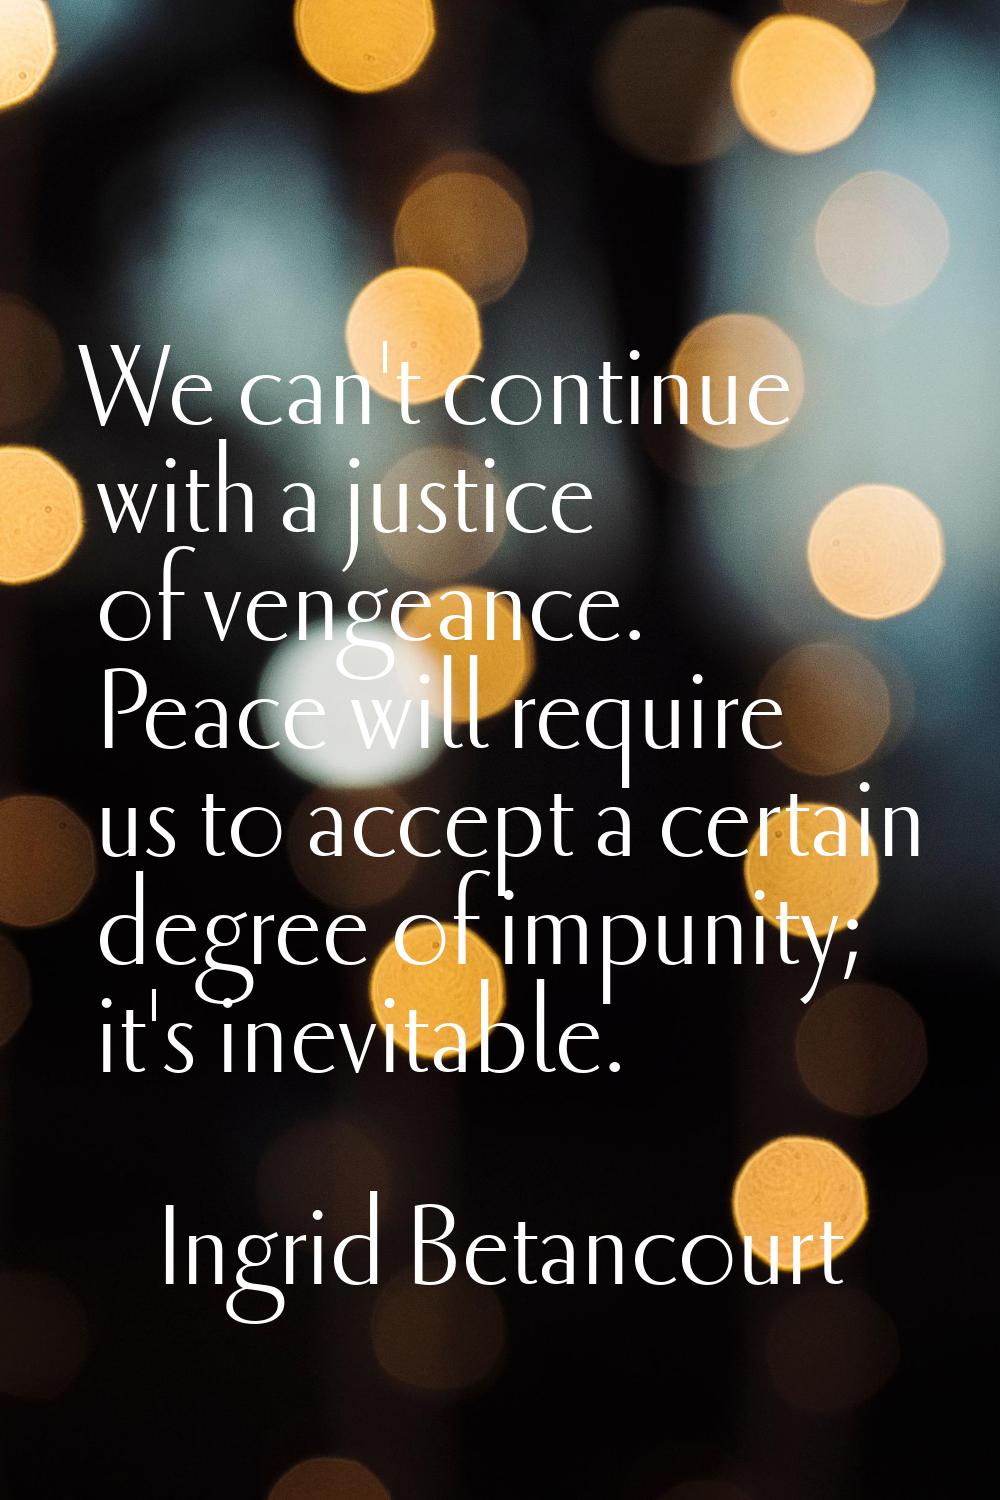 We can't continue with a justice of vengeance. Peace will require us to accept a certain degree of 